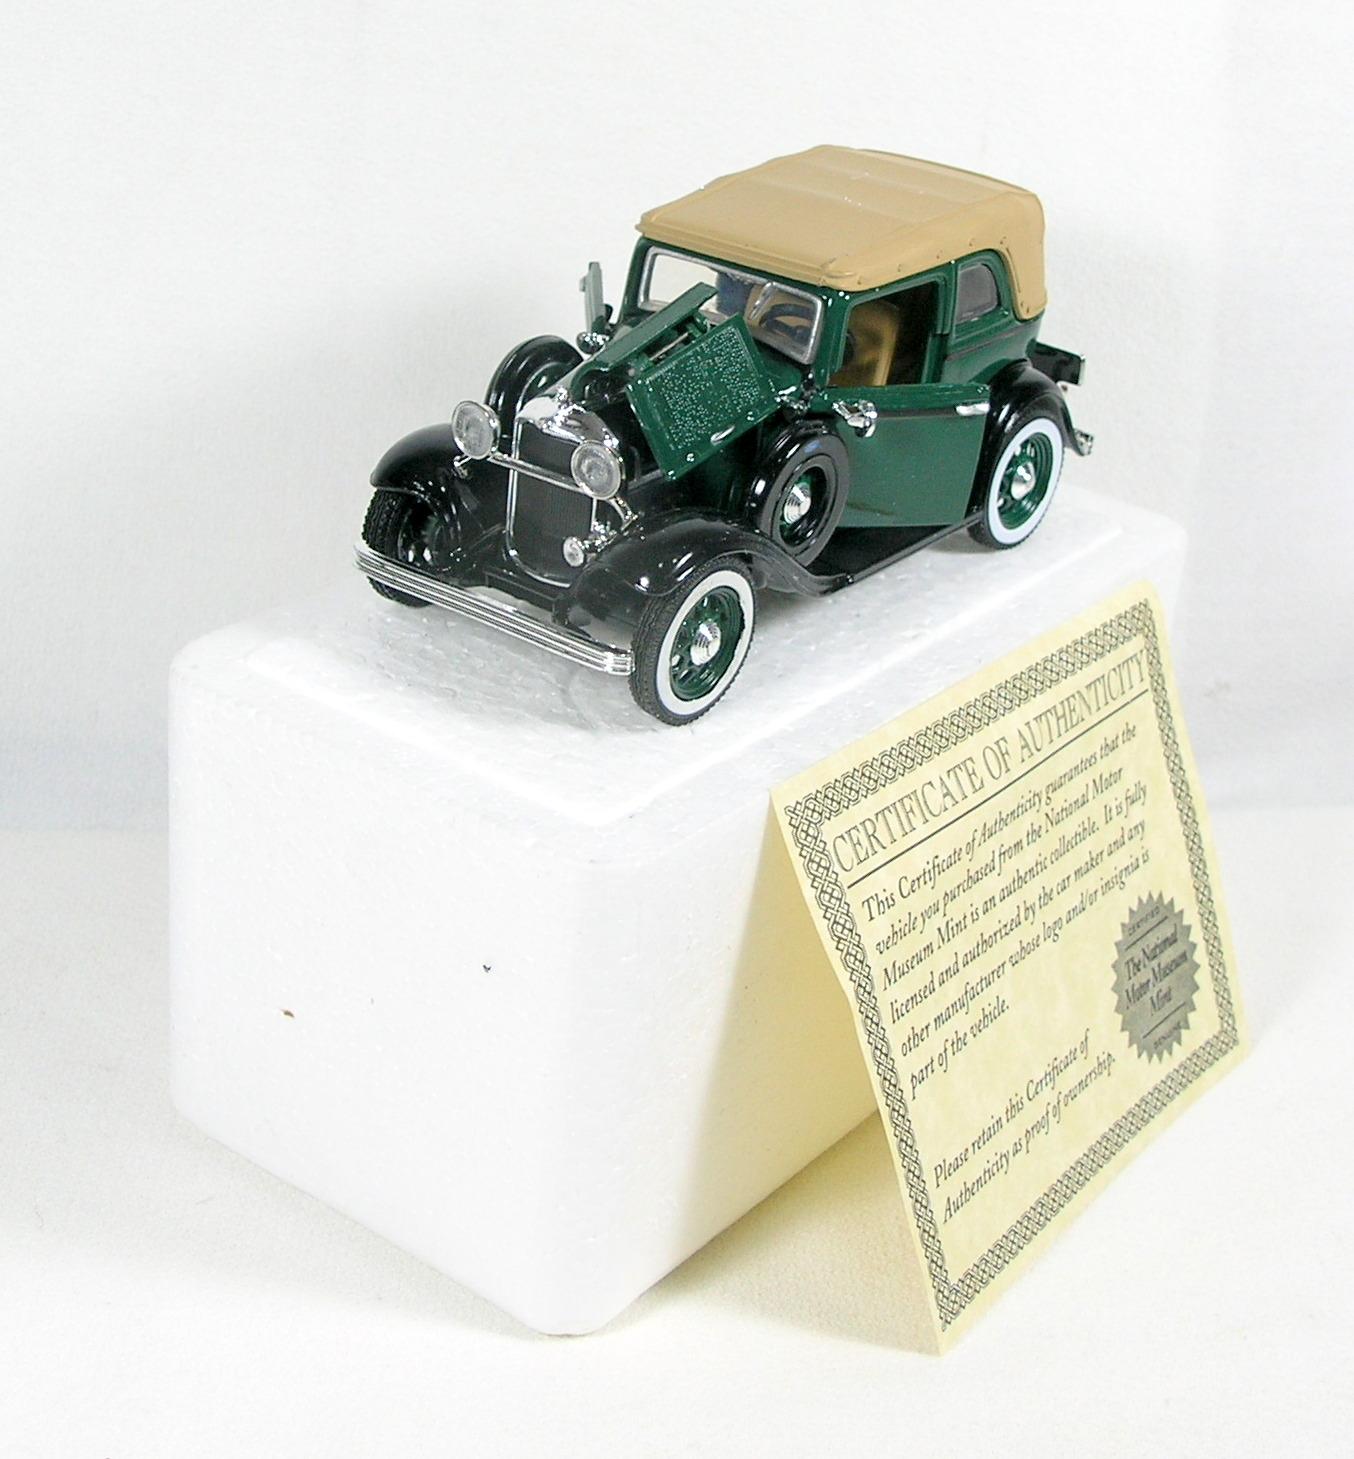 Diecast Replica of 1932 Ford  Convertible Sedan From National Motor Museum